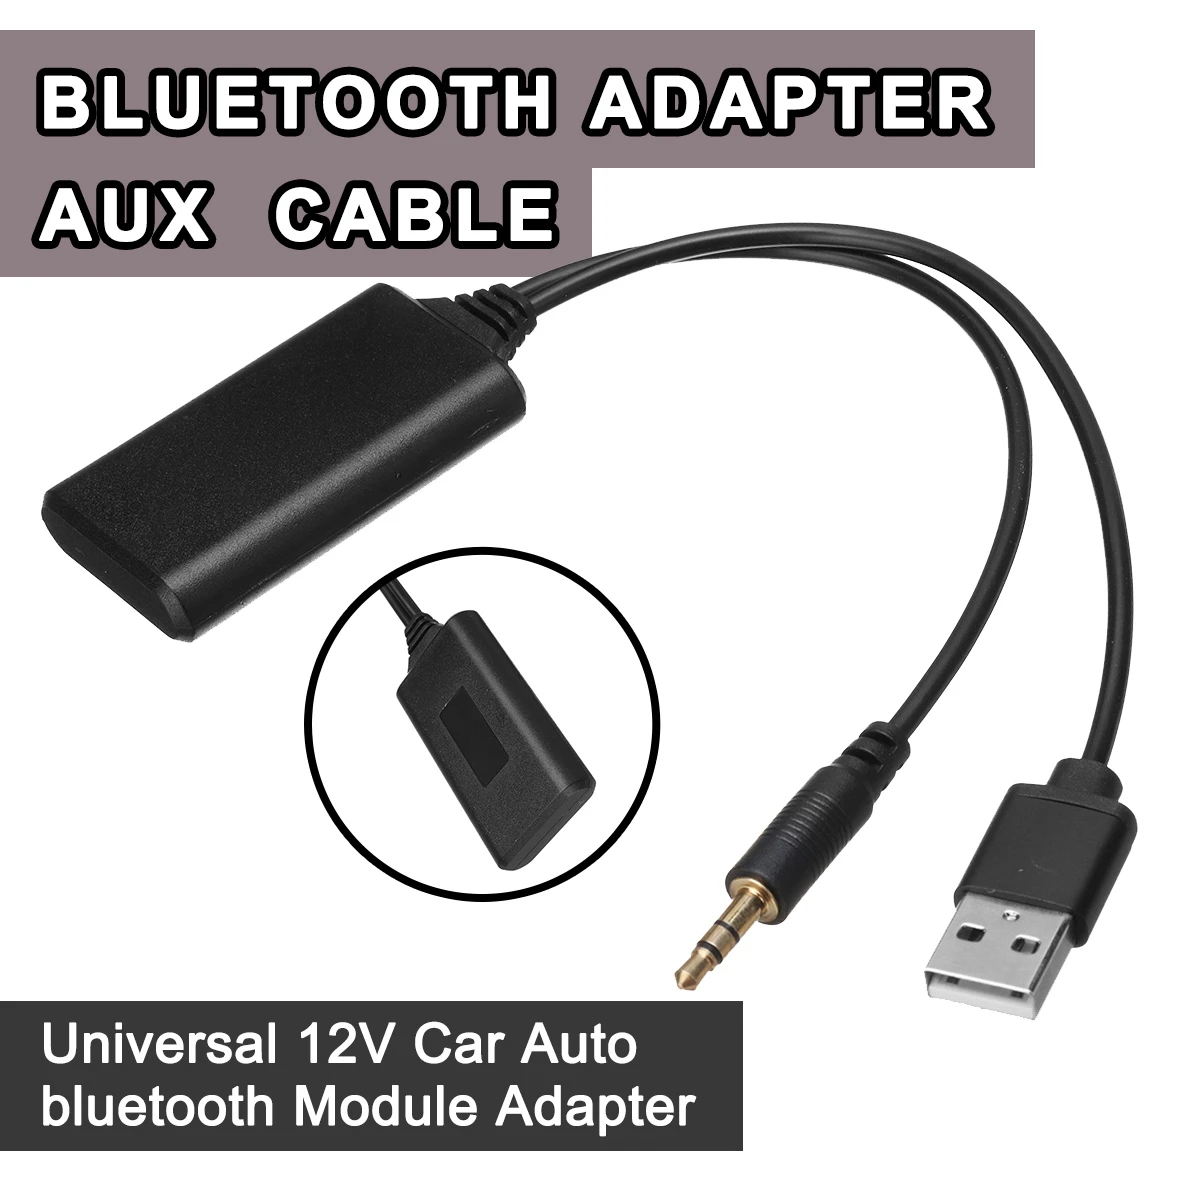 samenvoegen Herstellen systeem Adapter Wireless Radio Stereo Universal 12v Car Auto Bluetooth Module  Aux-in Aux Cable Adapter Usb 3.5mm Jack Plug - Car Audio Accessories/car  Stereo Accessories - AliExpress